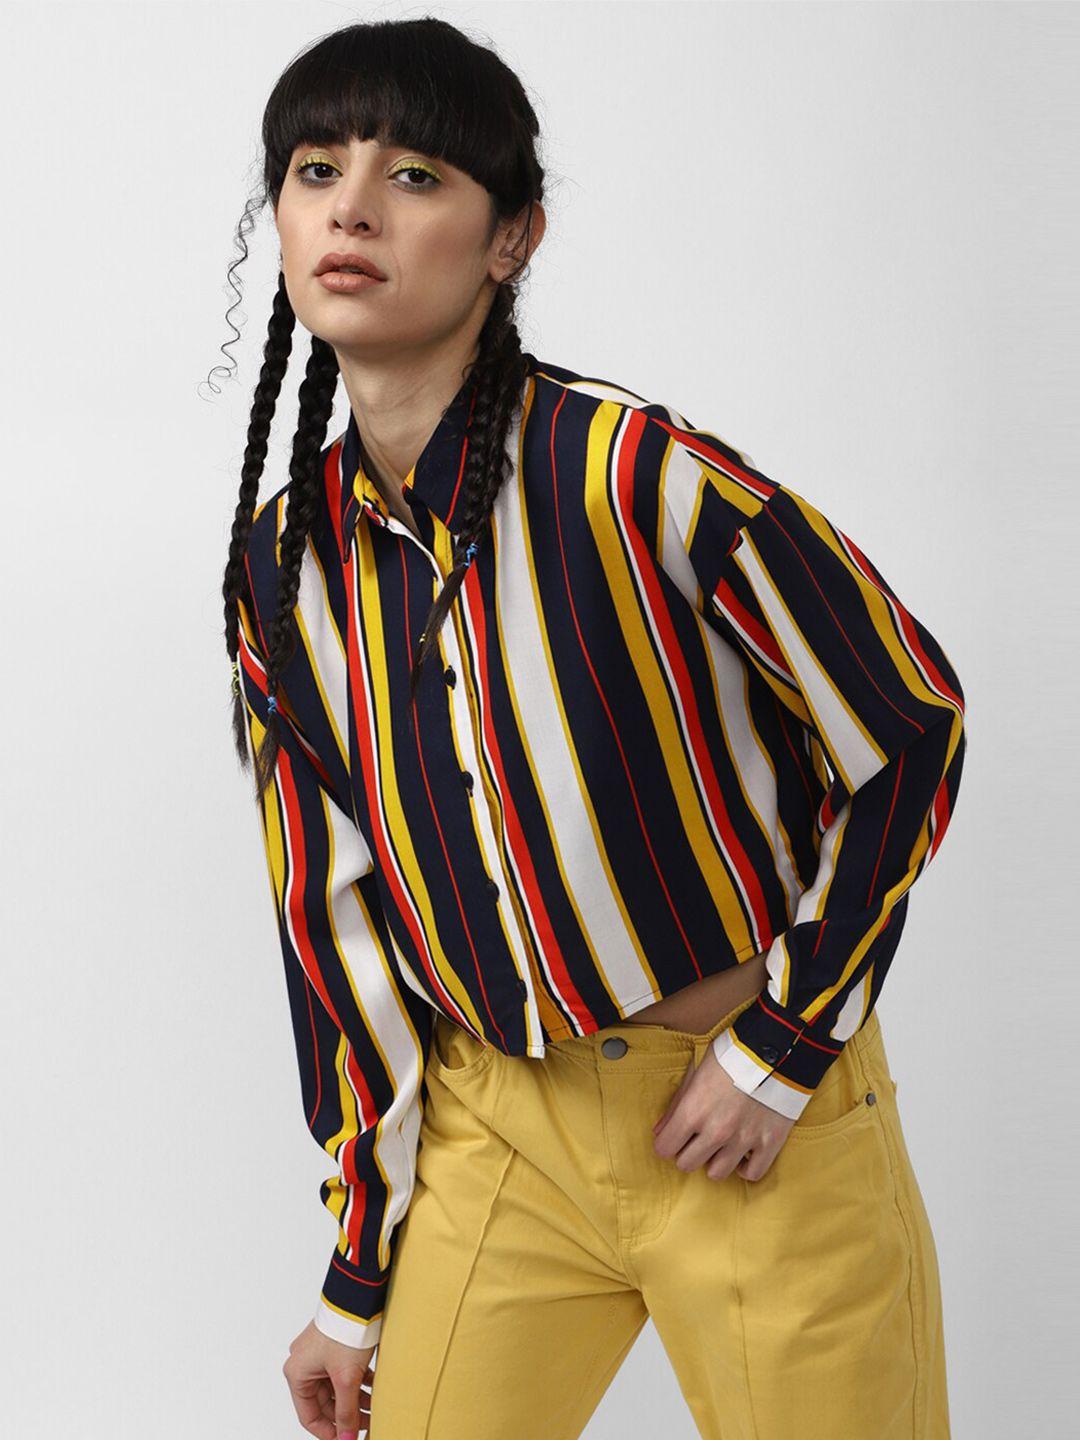 forever-21-black-&-yellow-striped-shirt-style-crop-top